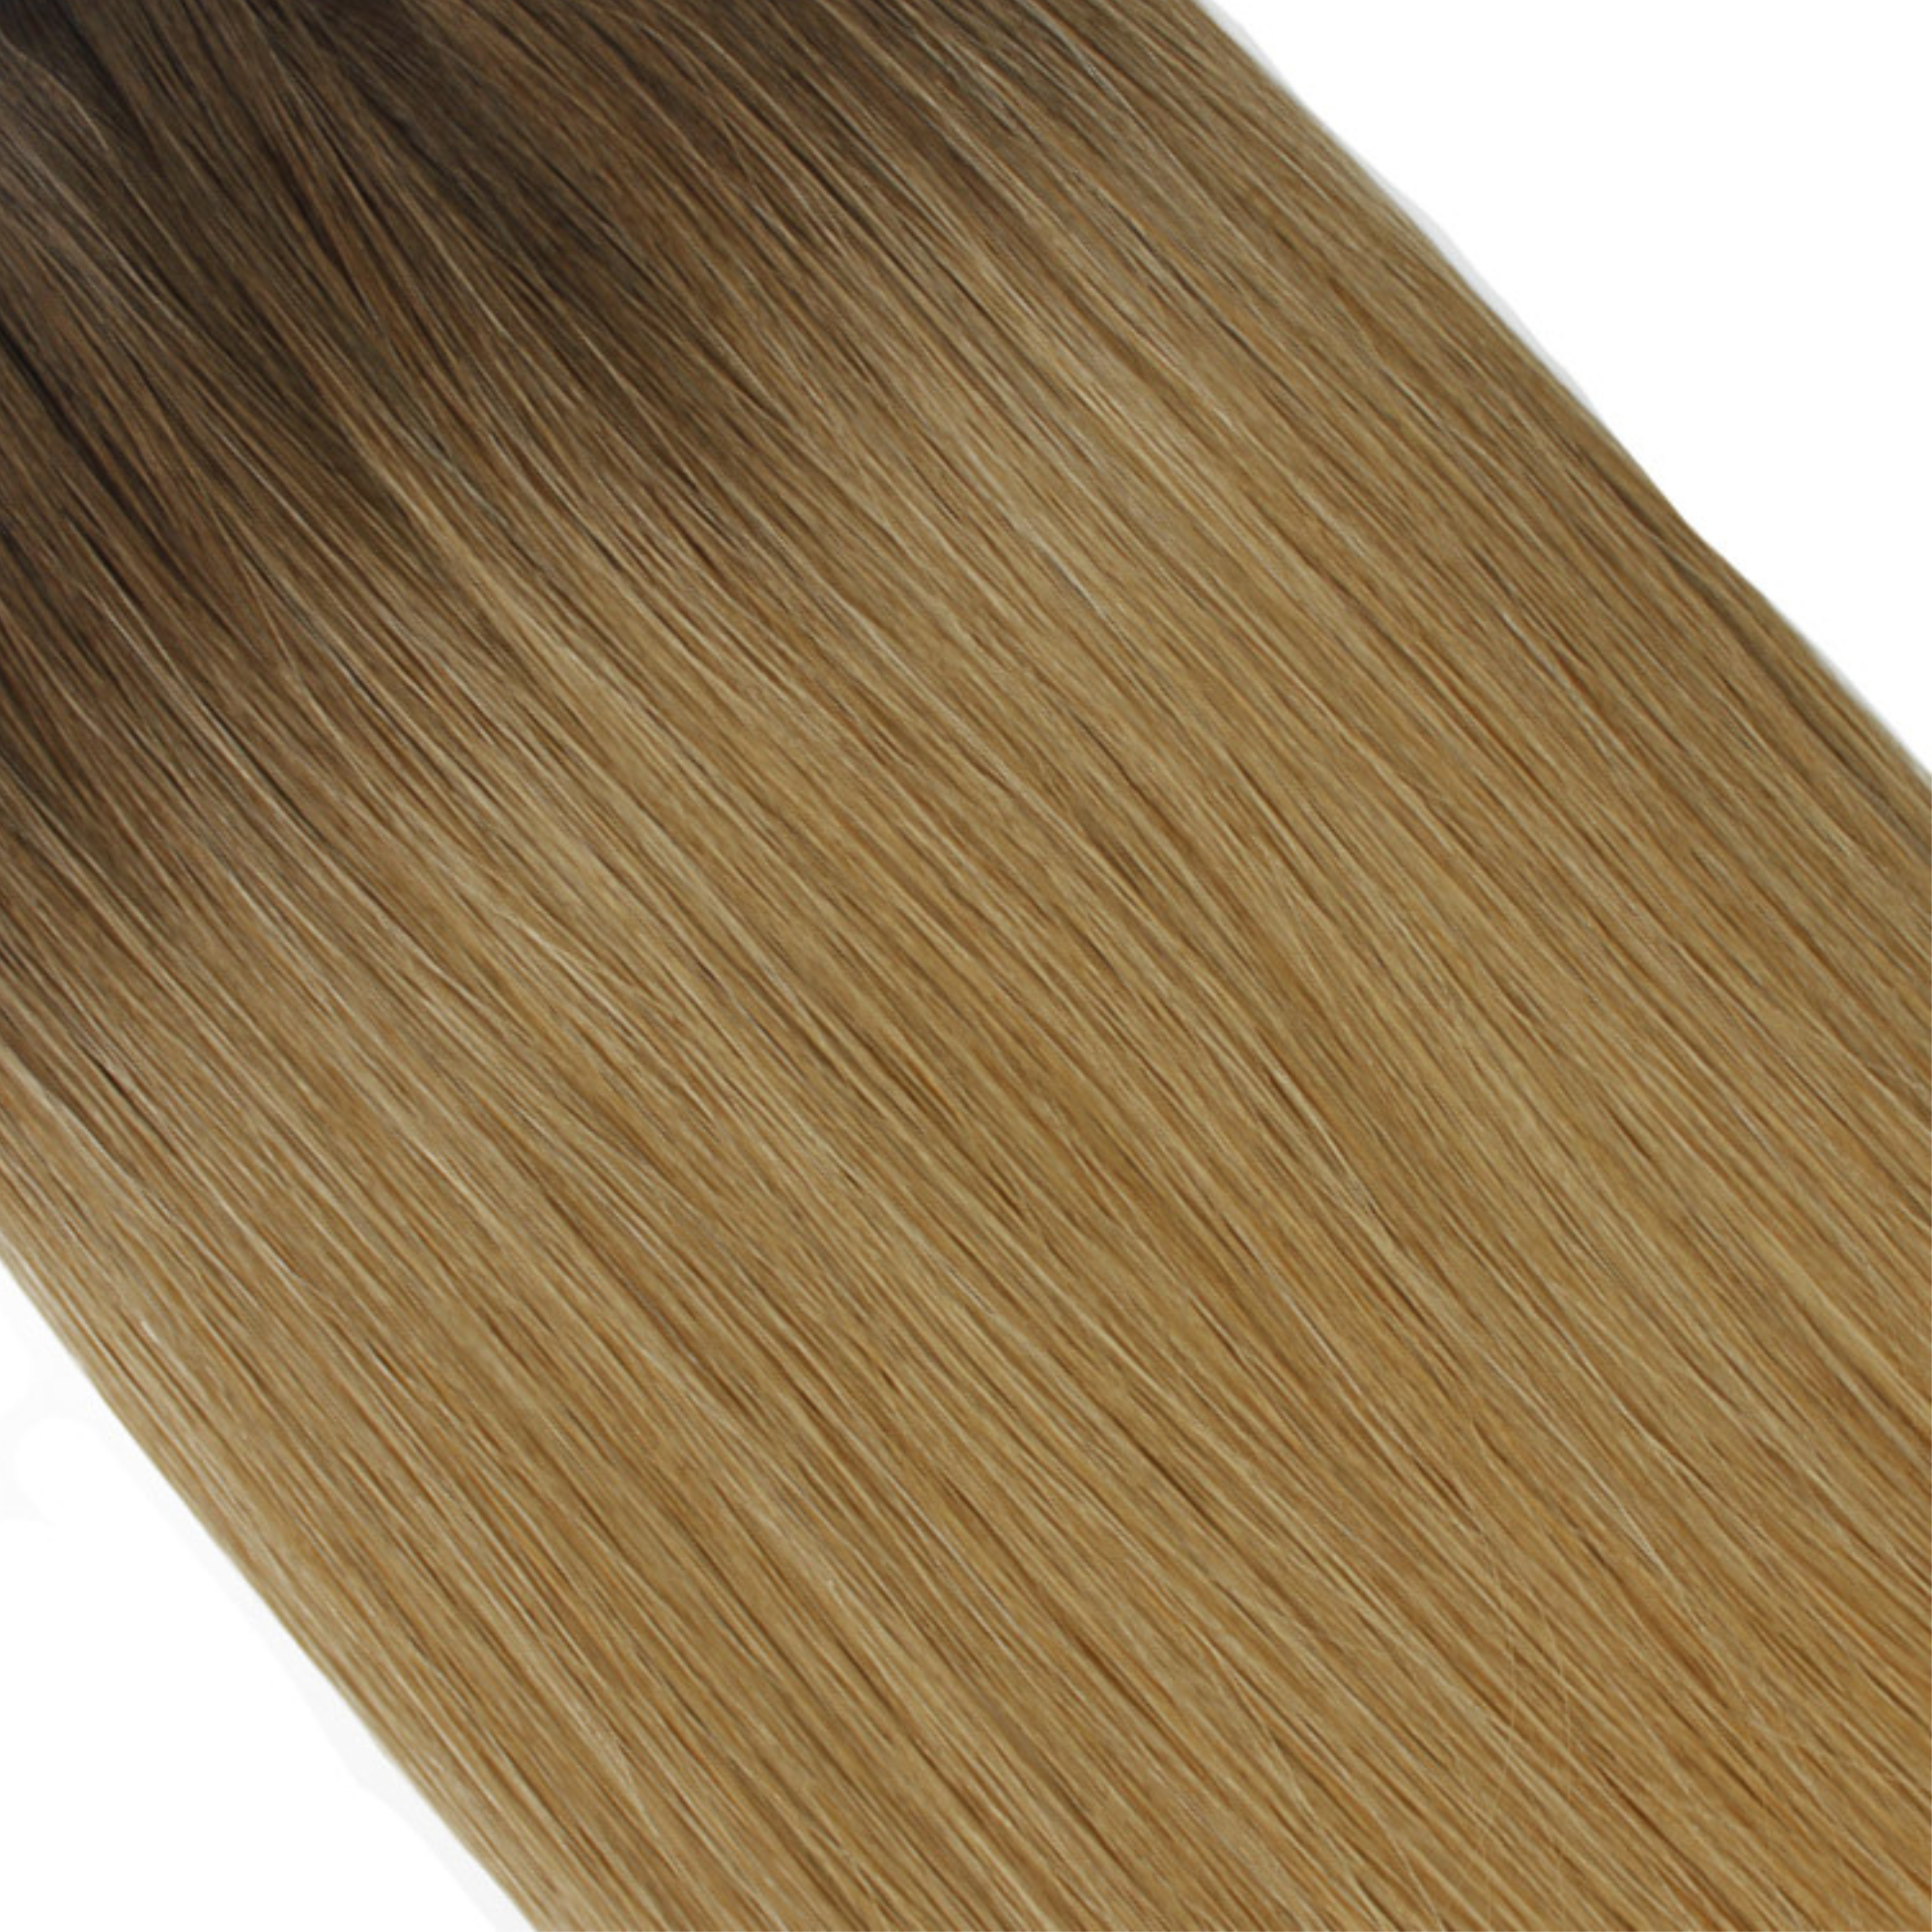 "hair rehab london 22" tape hair extensions shade swatch titled rooted boho"